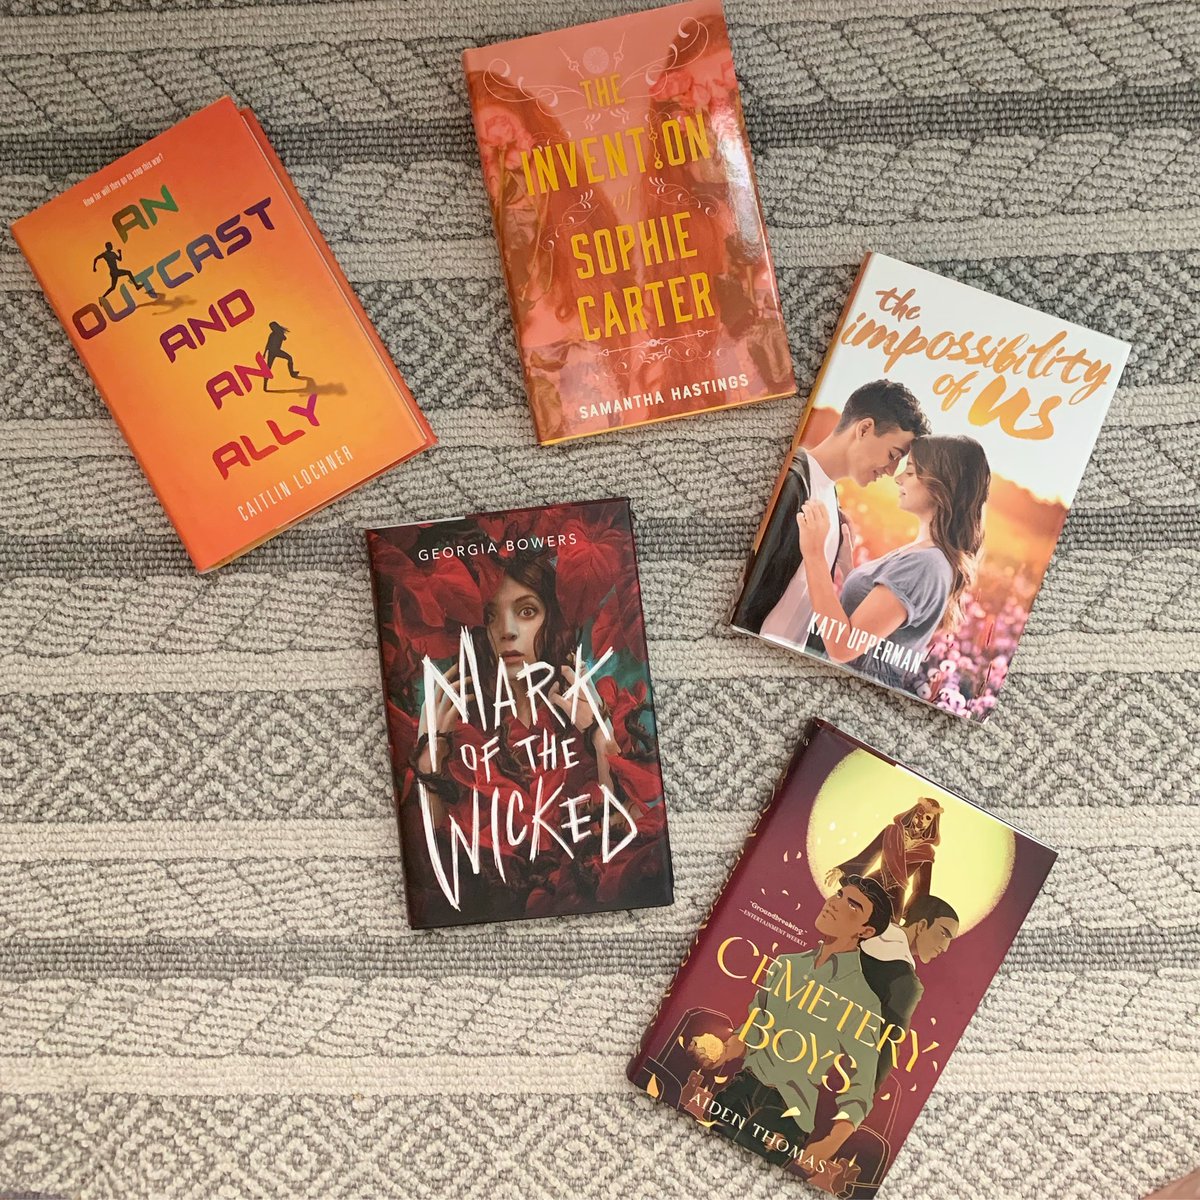 Feeling fall colors 🍂🍁🍂 as the weather changes. What’s on your TBR this month? @caitlinlochner @HastingSamantha @KatyUpperman @georgia_bowers @aidenschmaiden